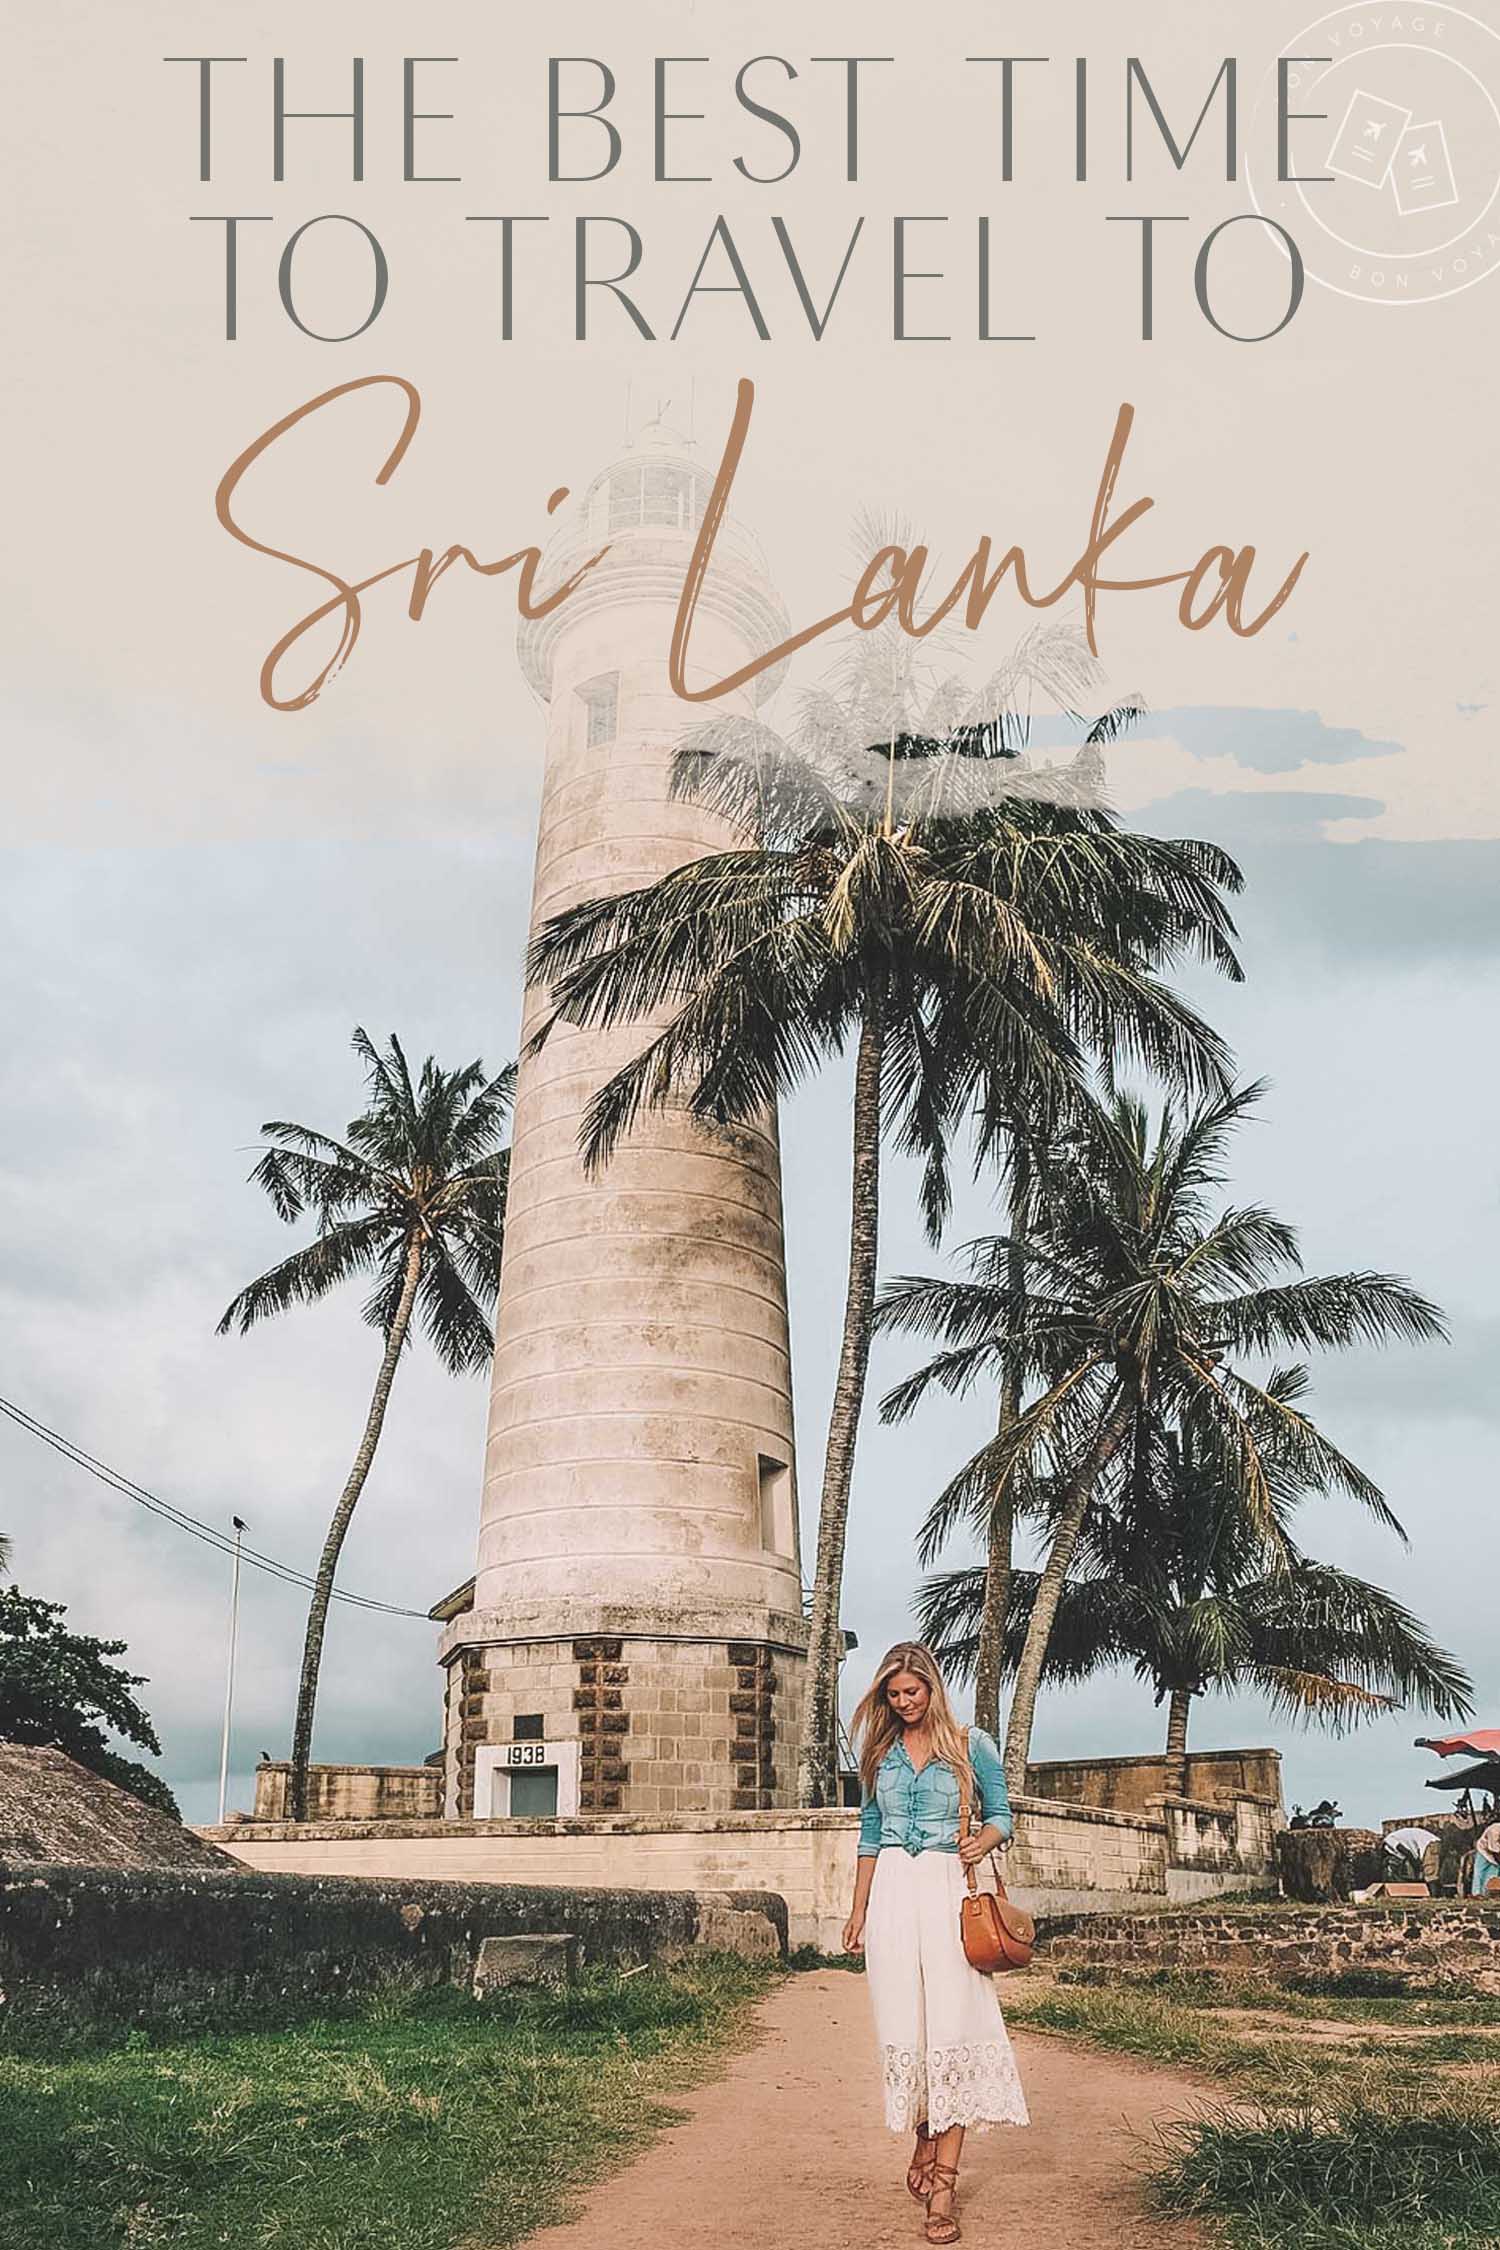 trolley bus læsning trug The Best Time to Travel to Sri Lanka • The Blonde Abroad